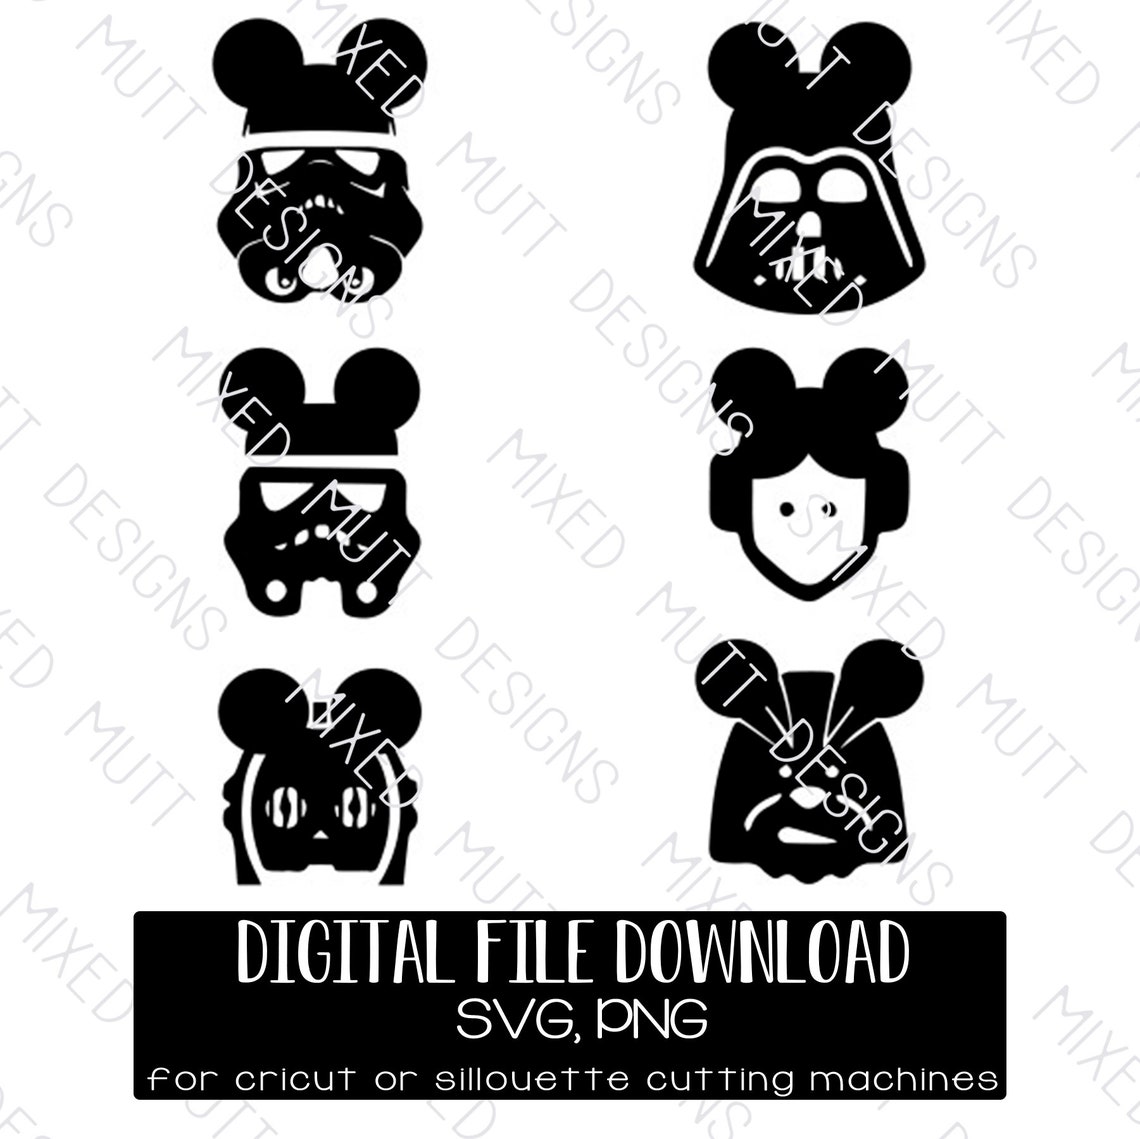 6 Star Wars Characters With Mickey Ears Designs Cut Out Files | Etsy